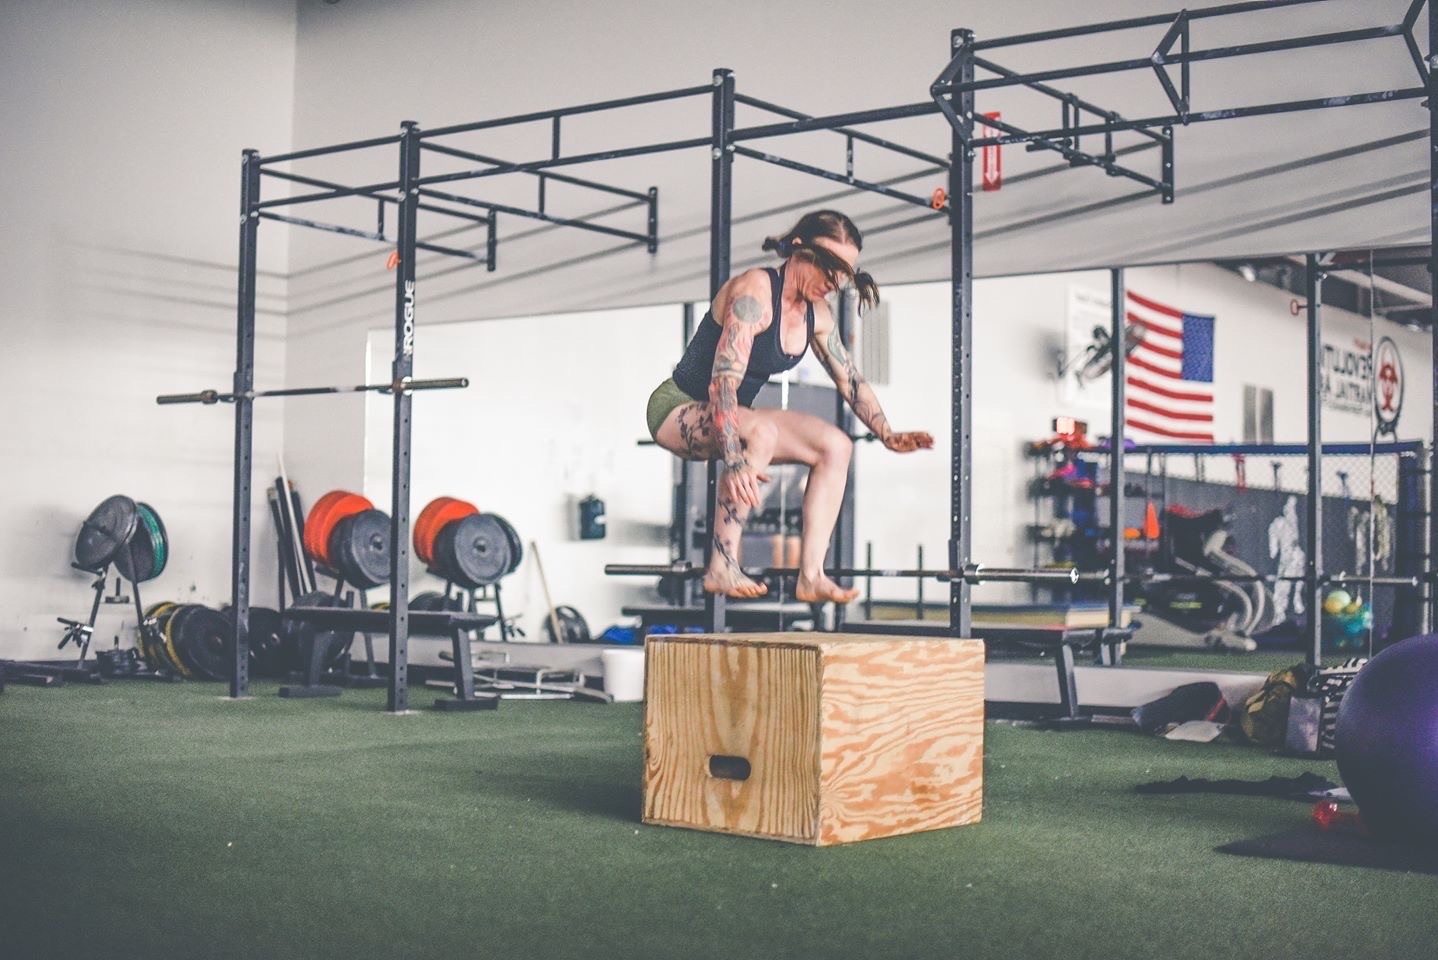 This Is How to Do Box Jumps (Correctly) in 4 Steps